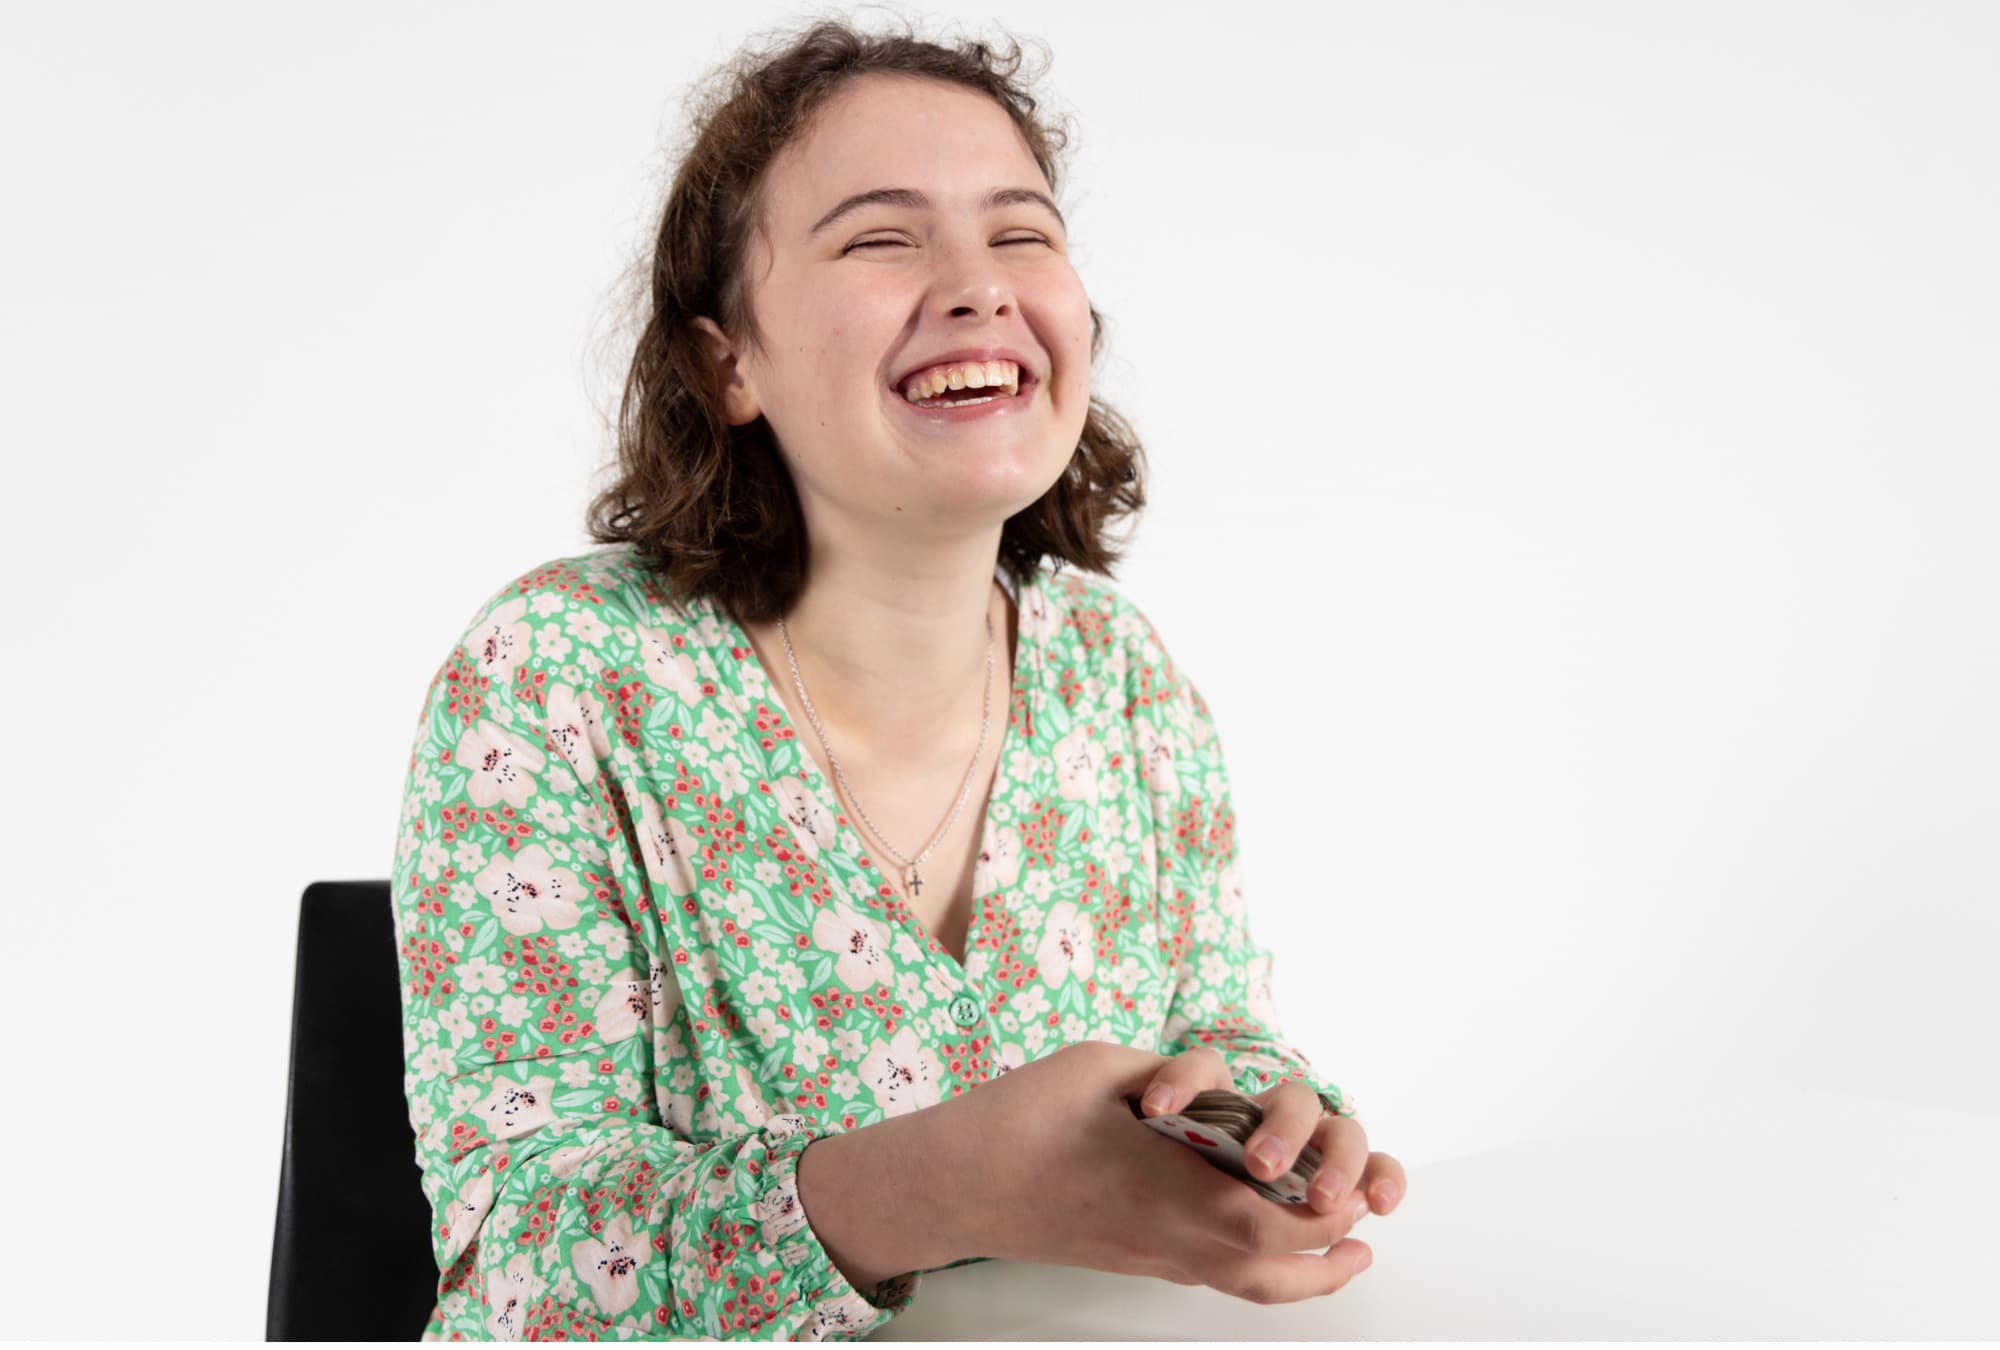 Client Imogen is sitting down and laughing while holding a pack of cards